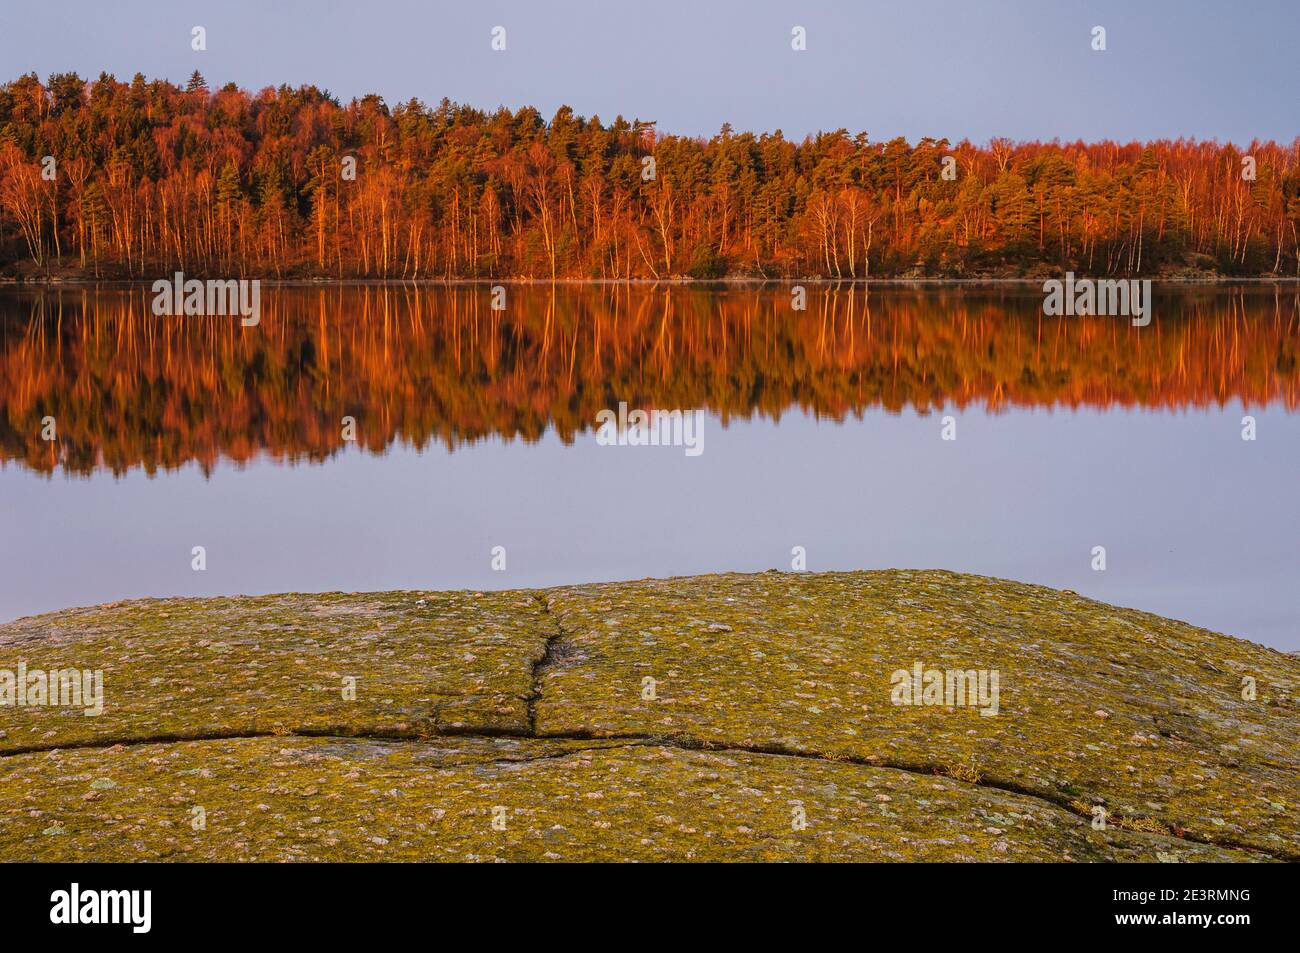 Reflections of forest at still water, Sweden. Stock Photo